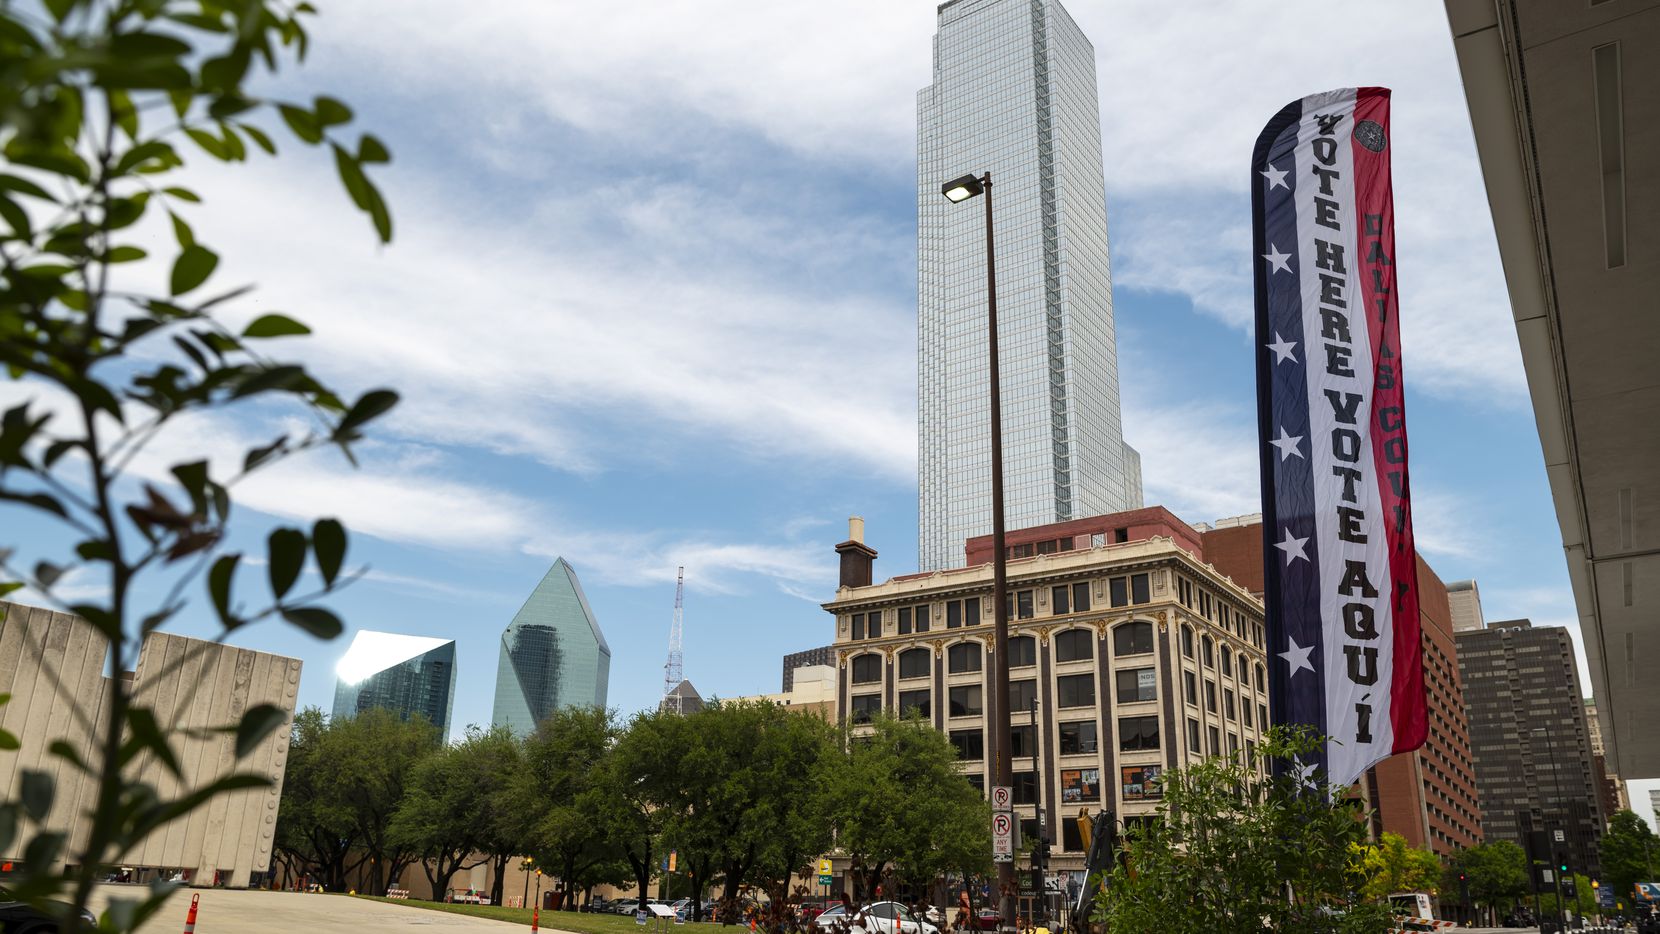 The audit of Dallas County returns in the 2020 presidential election is ongoing, but Dallas...